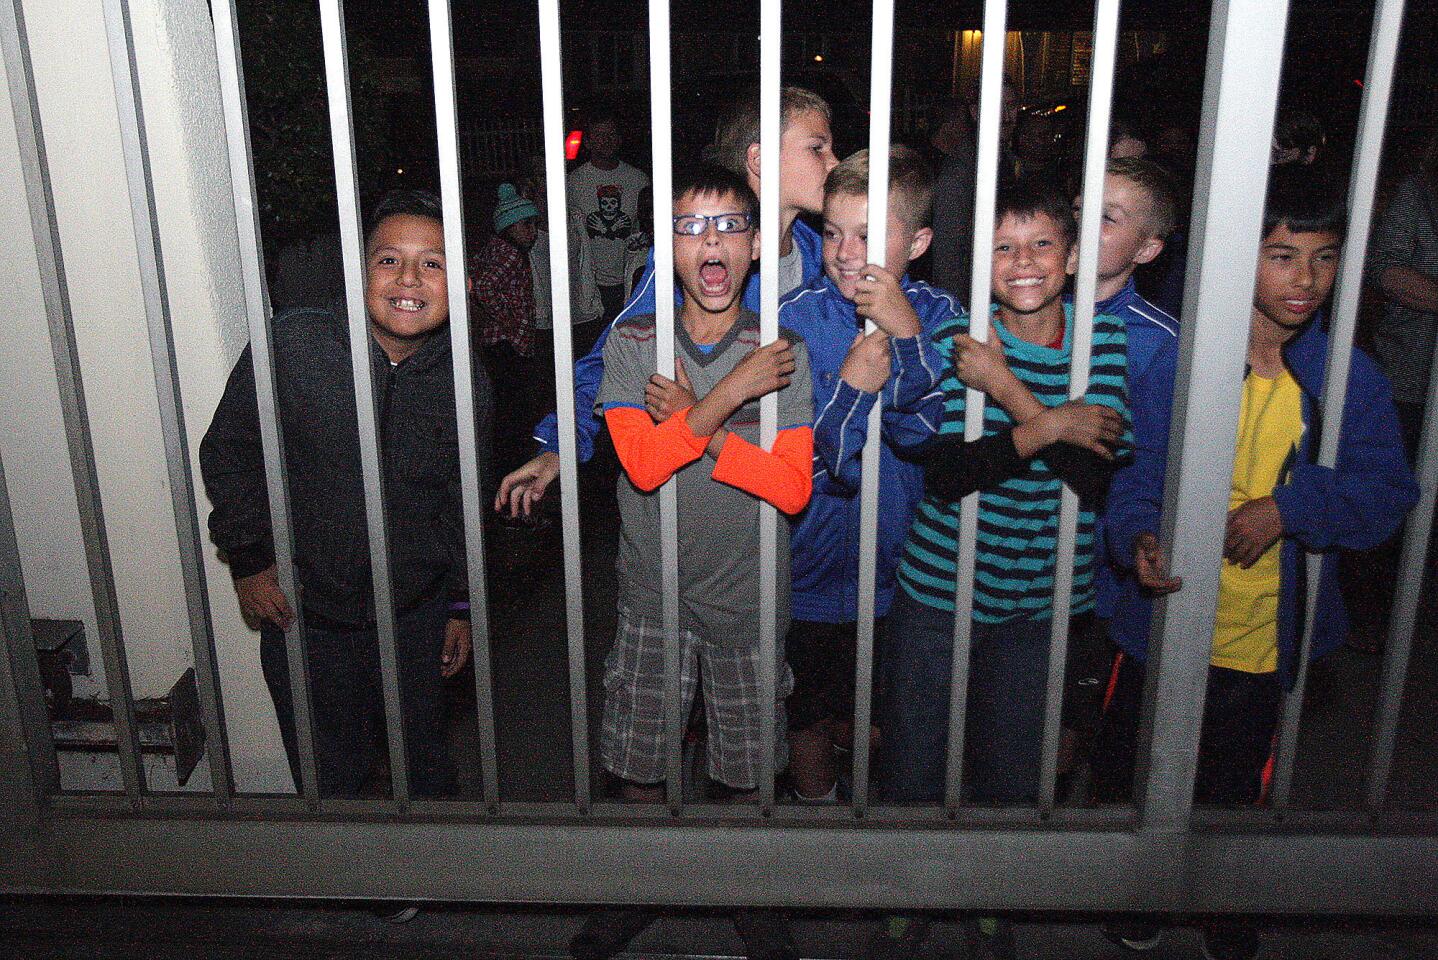 Photo Gallery: Crescenta Valley Sheriff's Station haunted jail